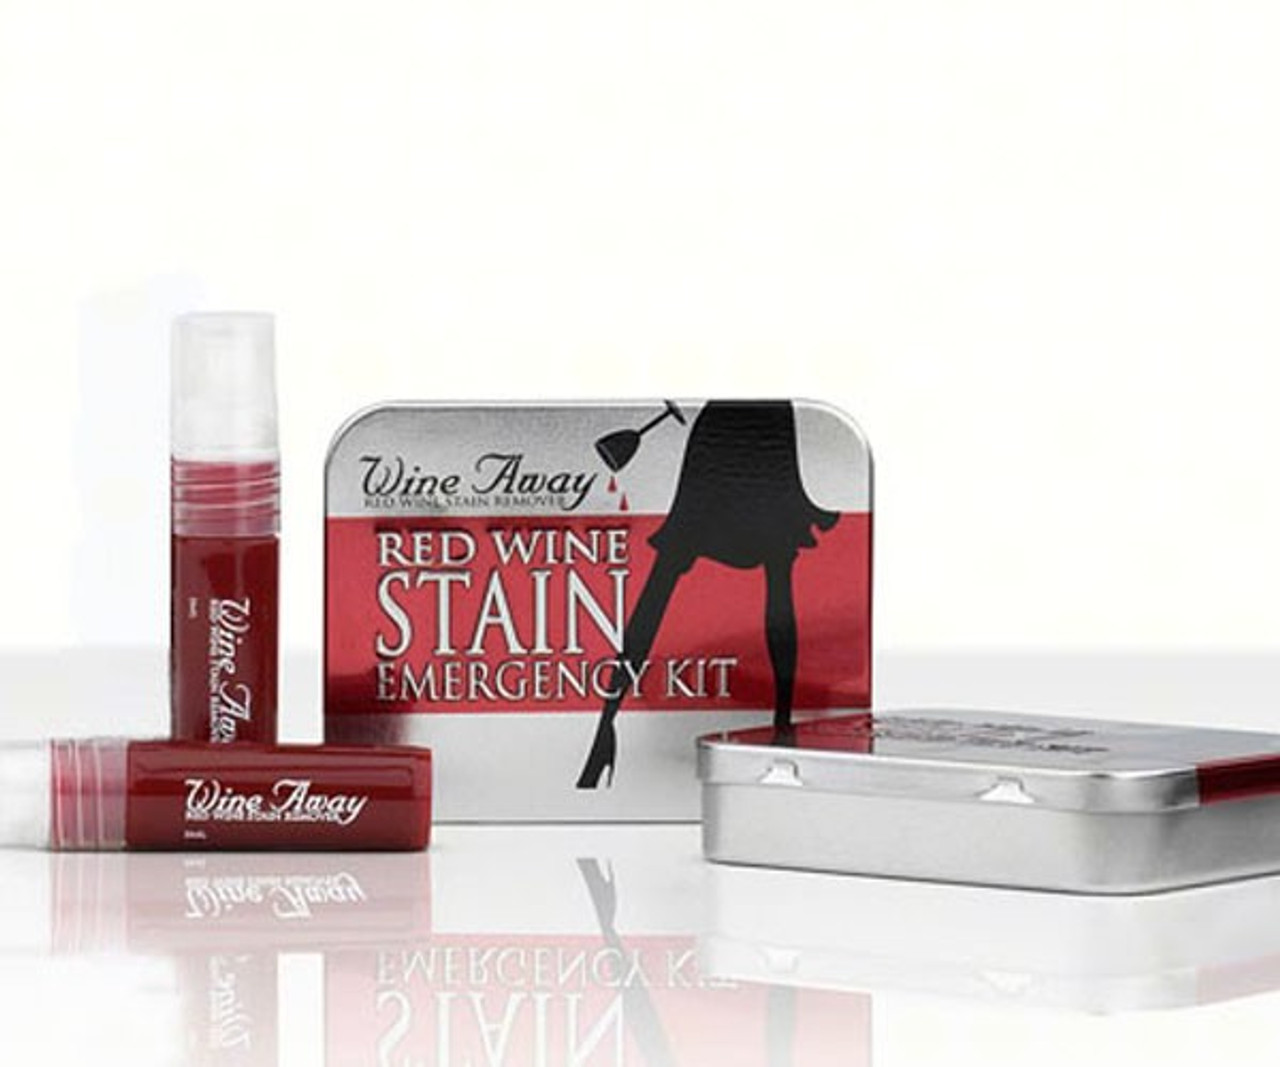 Wine Away Red Wine Stain Remover, 12 oz.